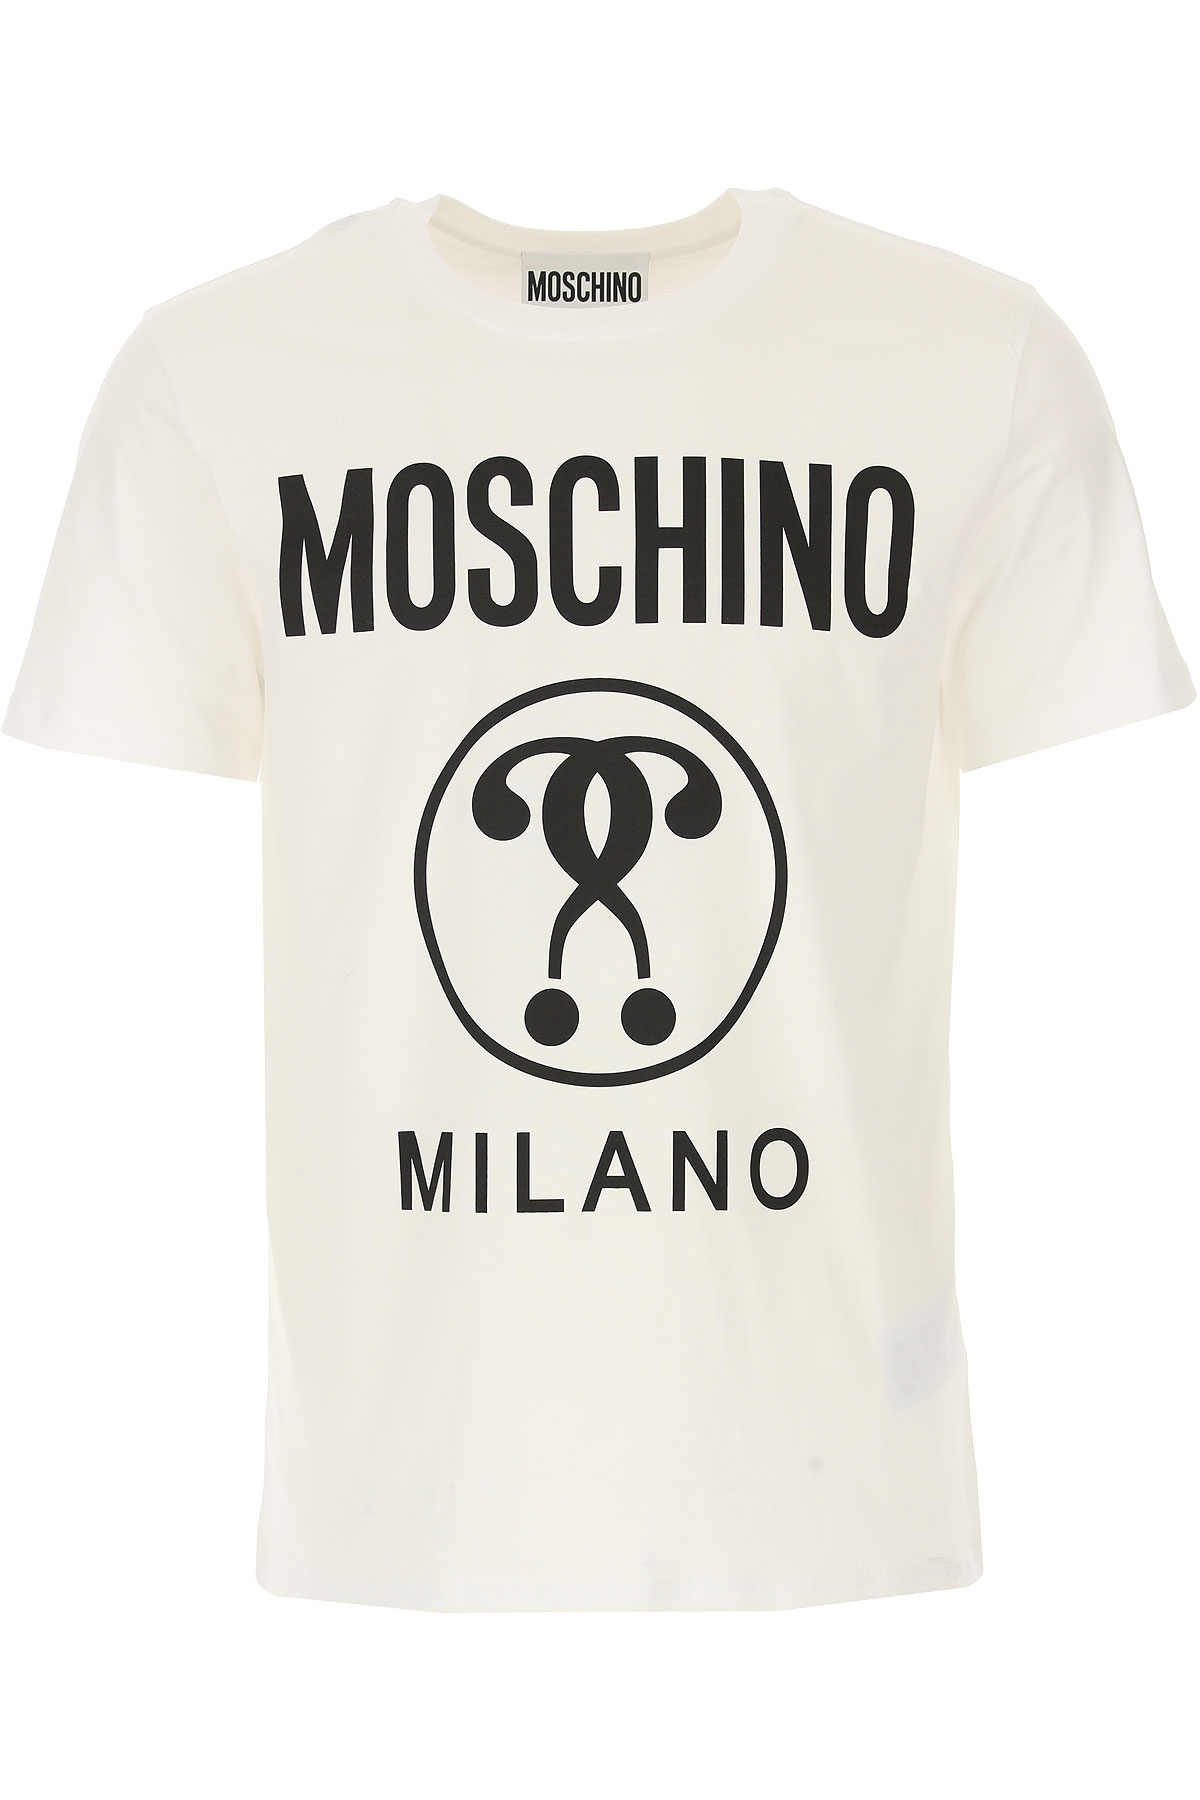 Mens Clothing Moschino, Style code: a0706-2040-1001